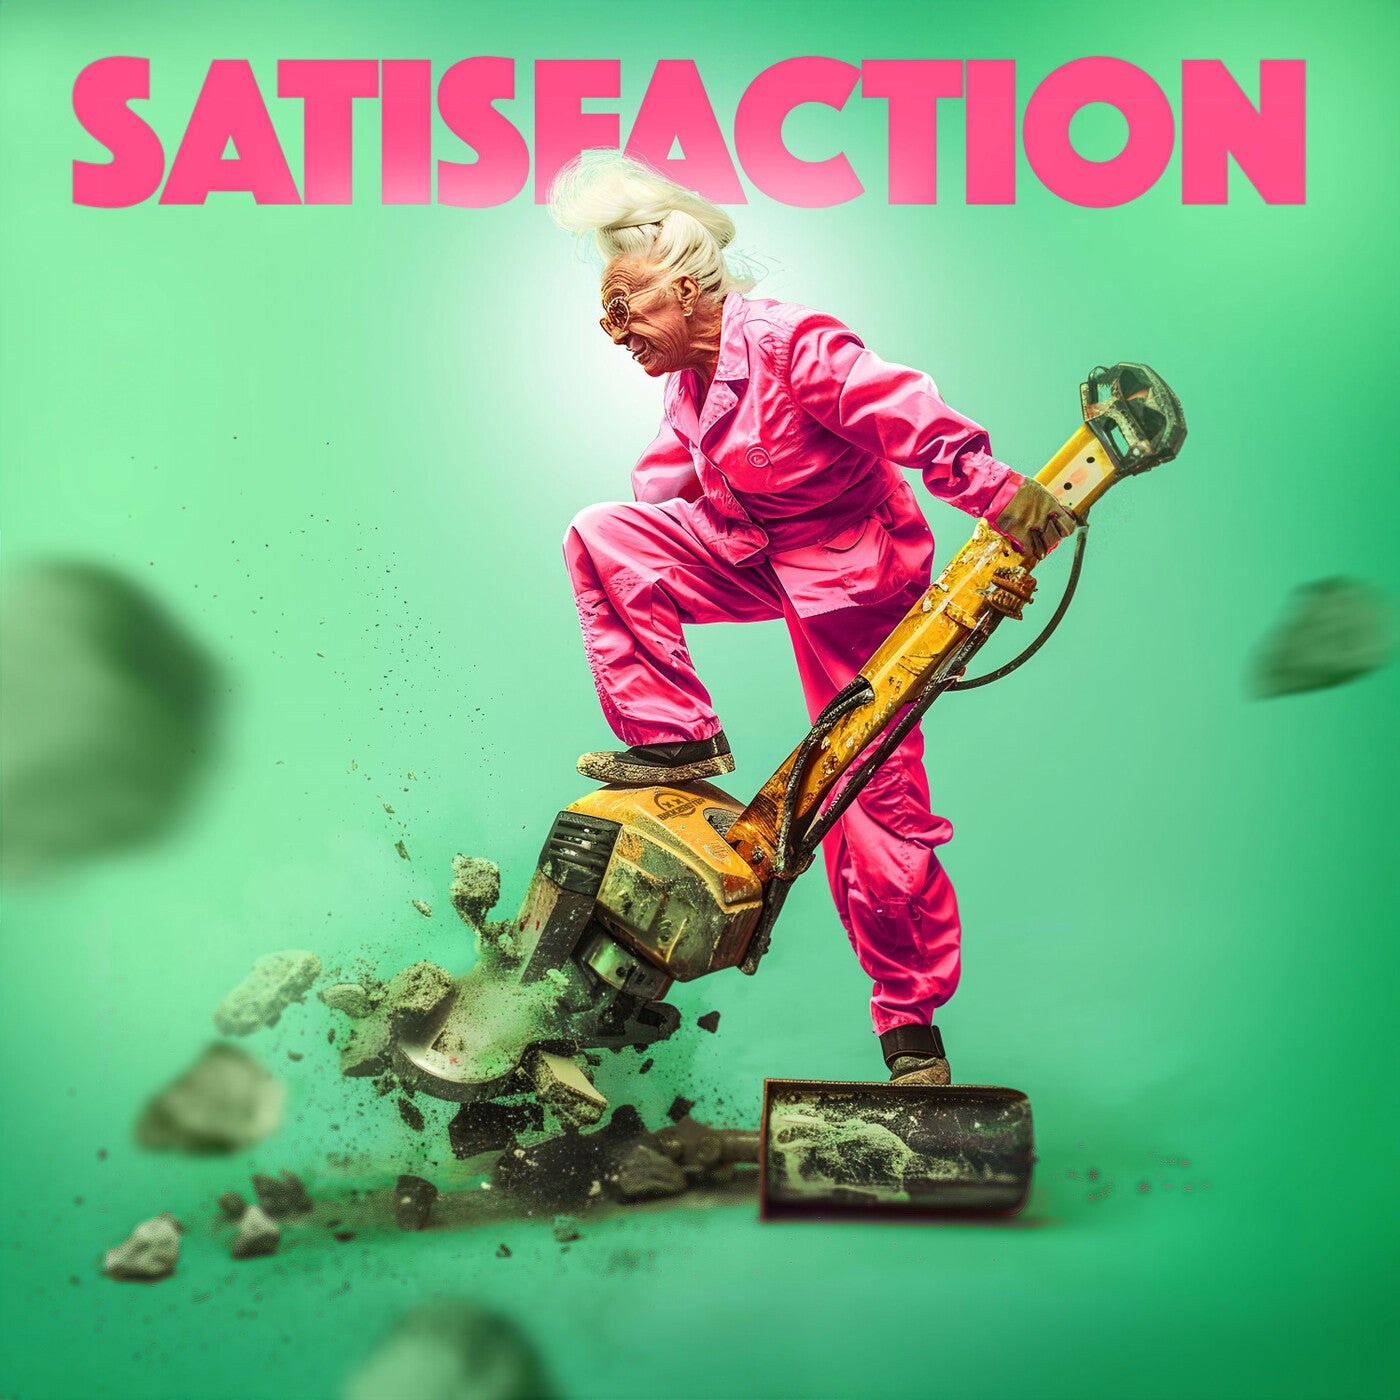 Satisfaction (Extended Mix)